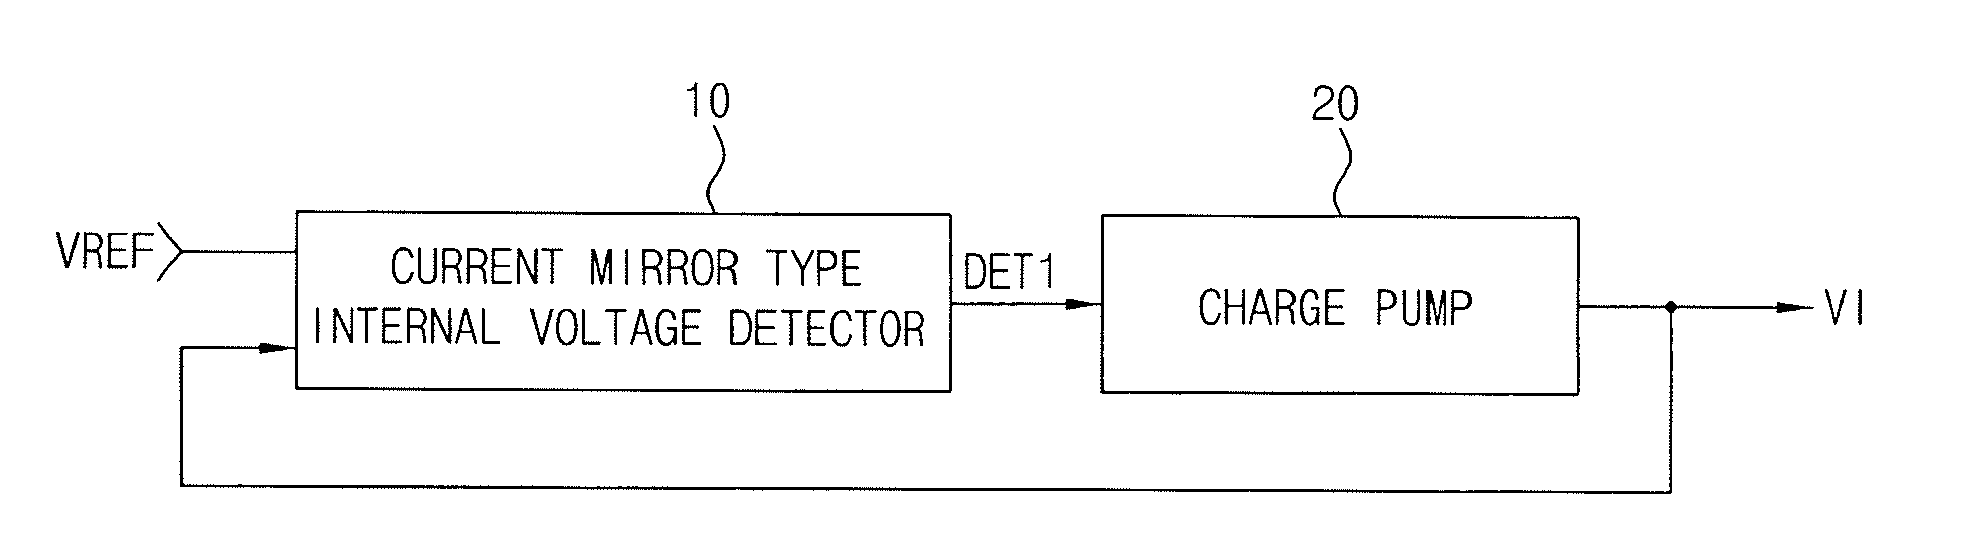 Internal voltage generation circuit for generating stable internal voltages withstanding varying external conditions